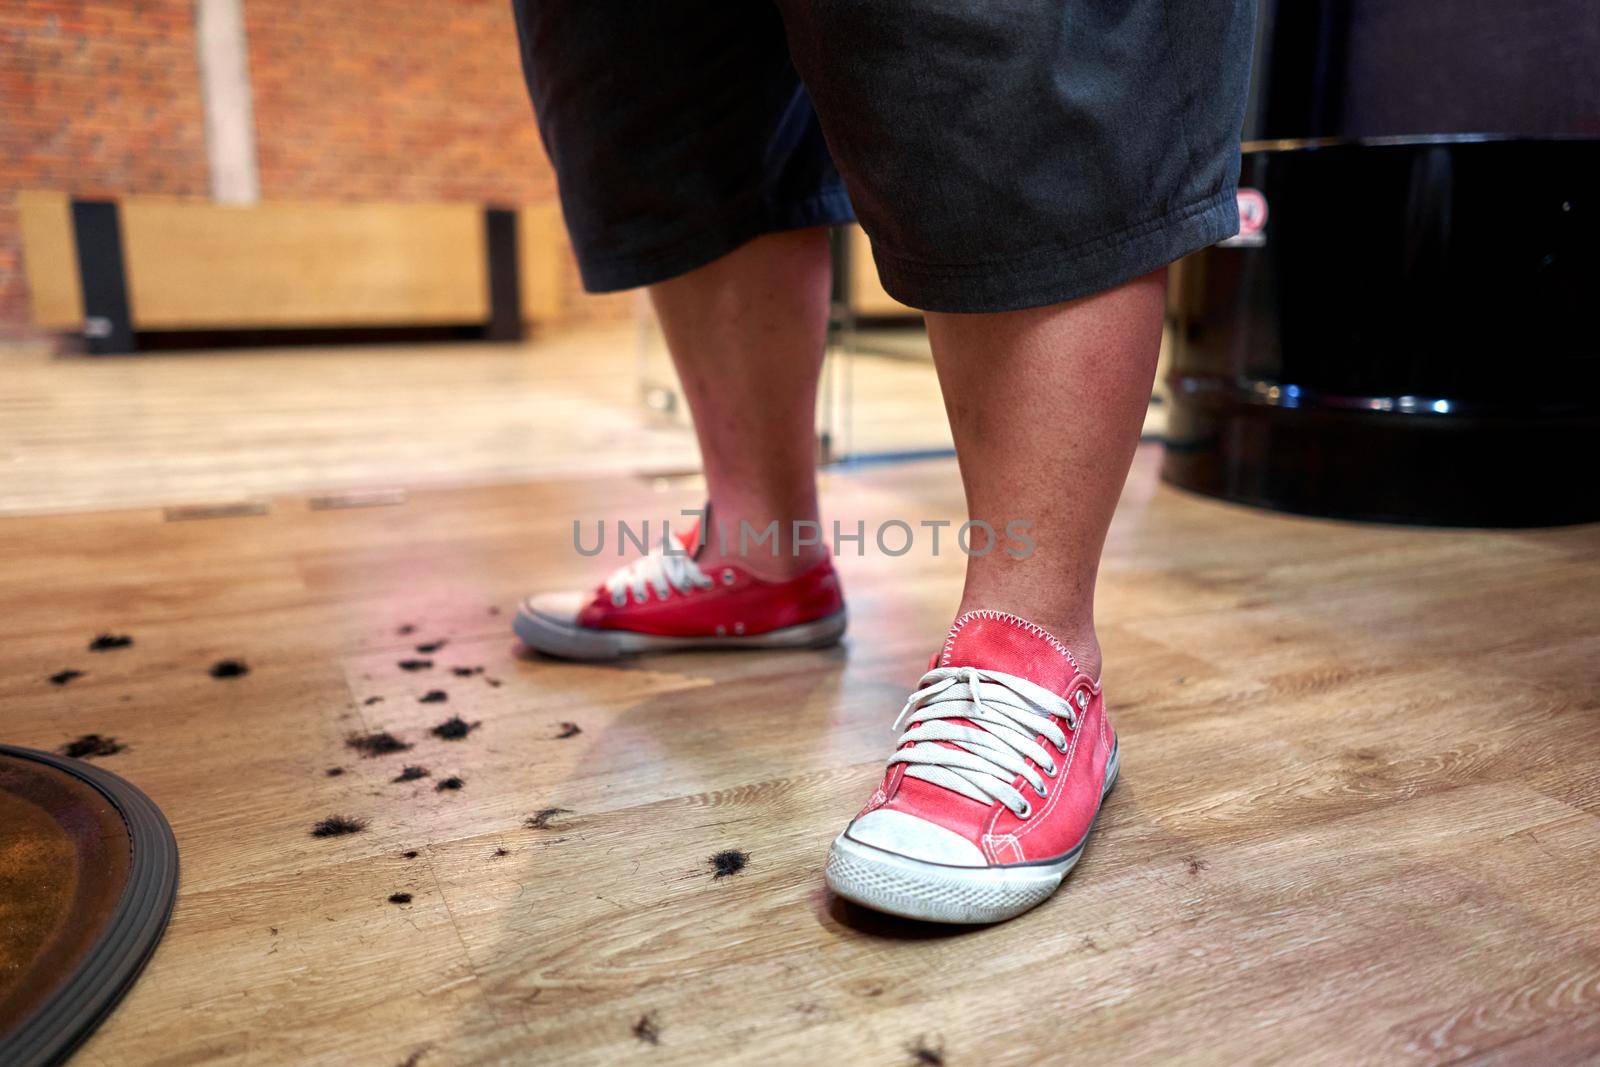 Barber's feet surrounded by hair on the floor by WesternExoticStockers